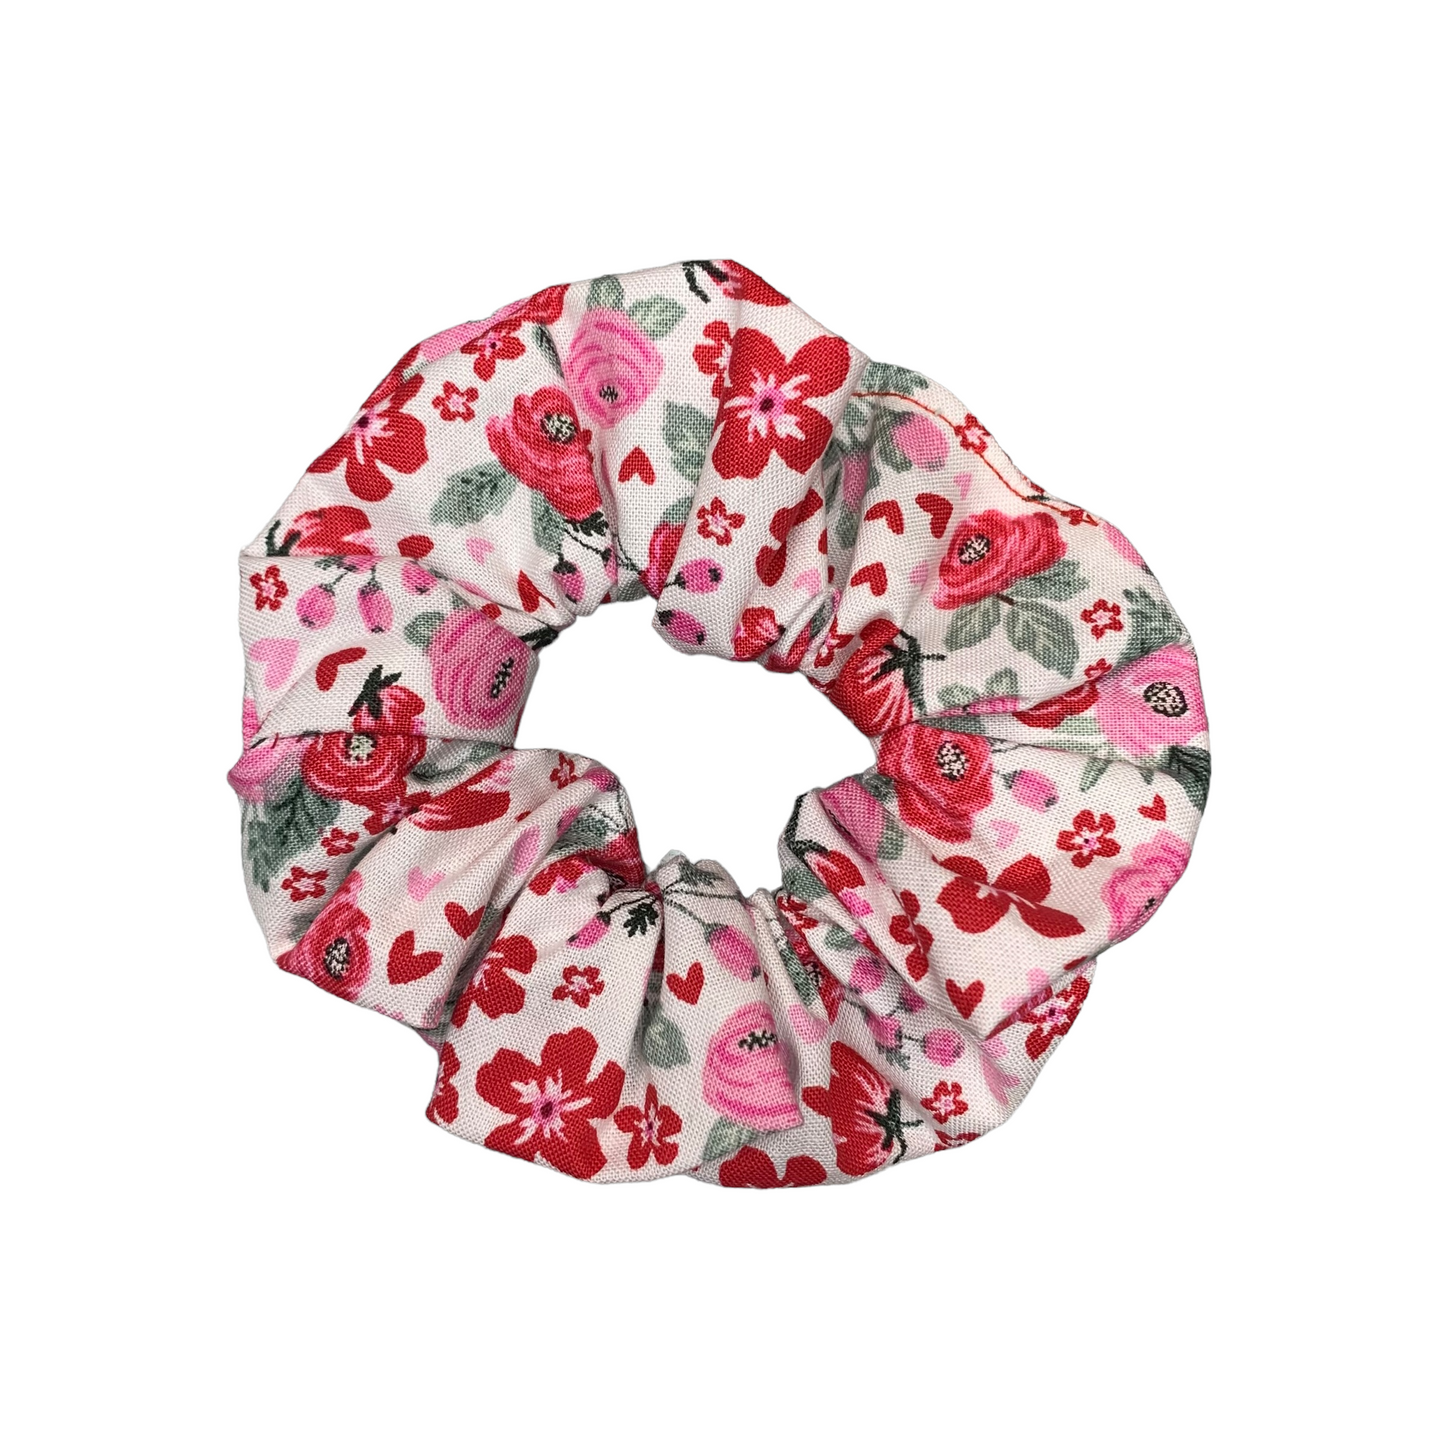 Handmade Pink and Red Floral Valentine's Scrunchie